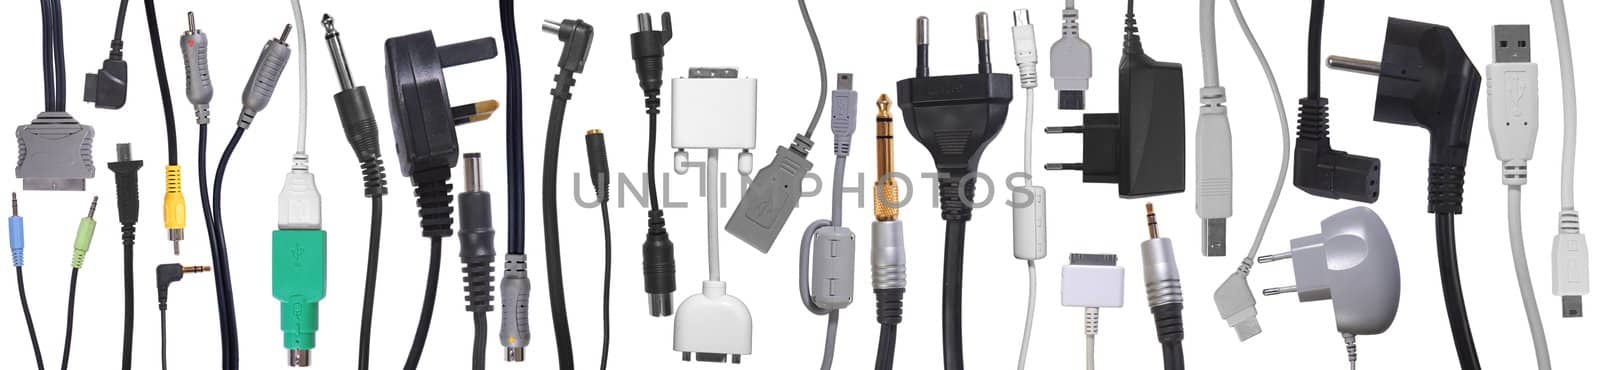 Cables, connector and jacks collection on white background